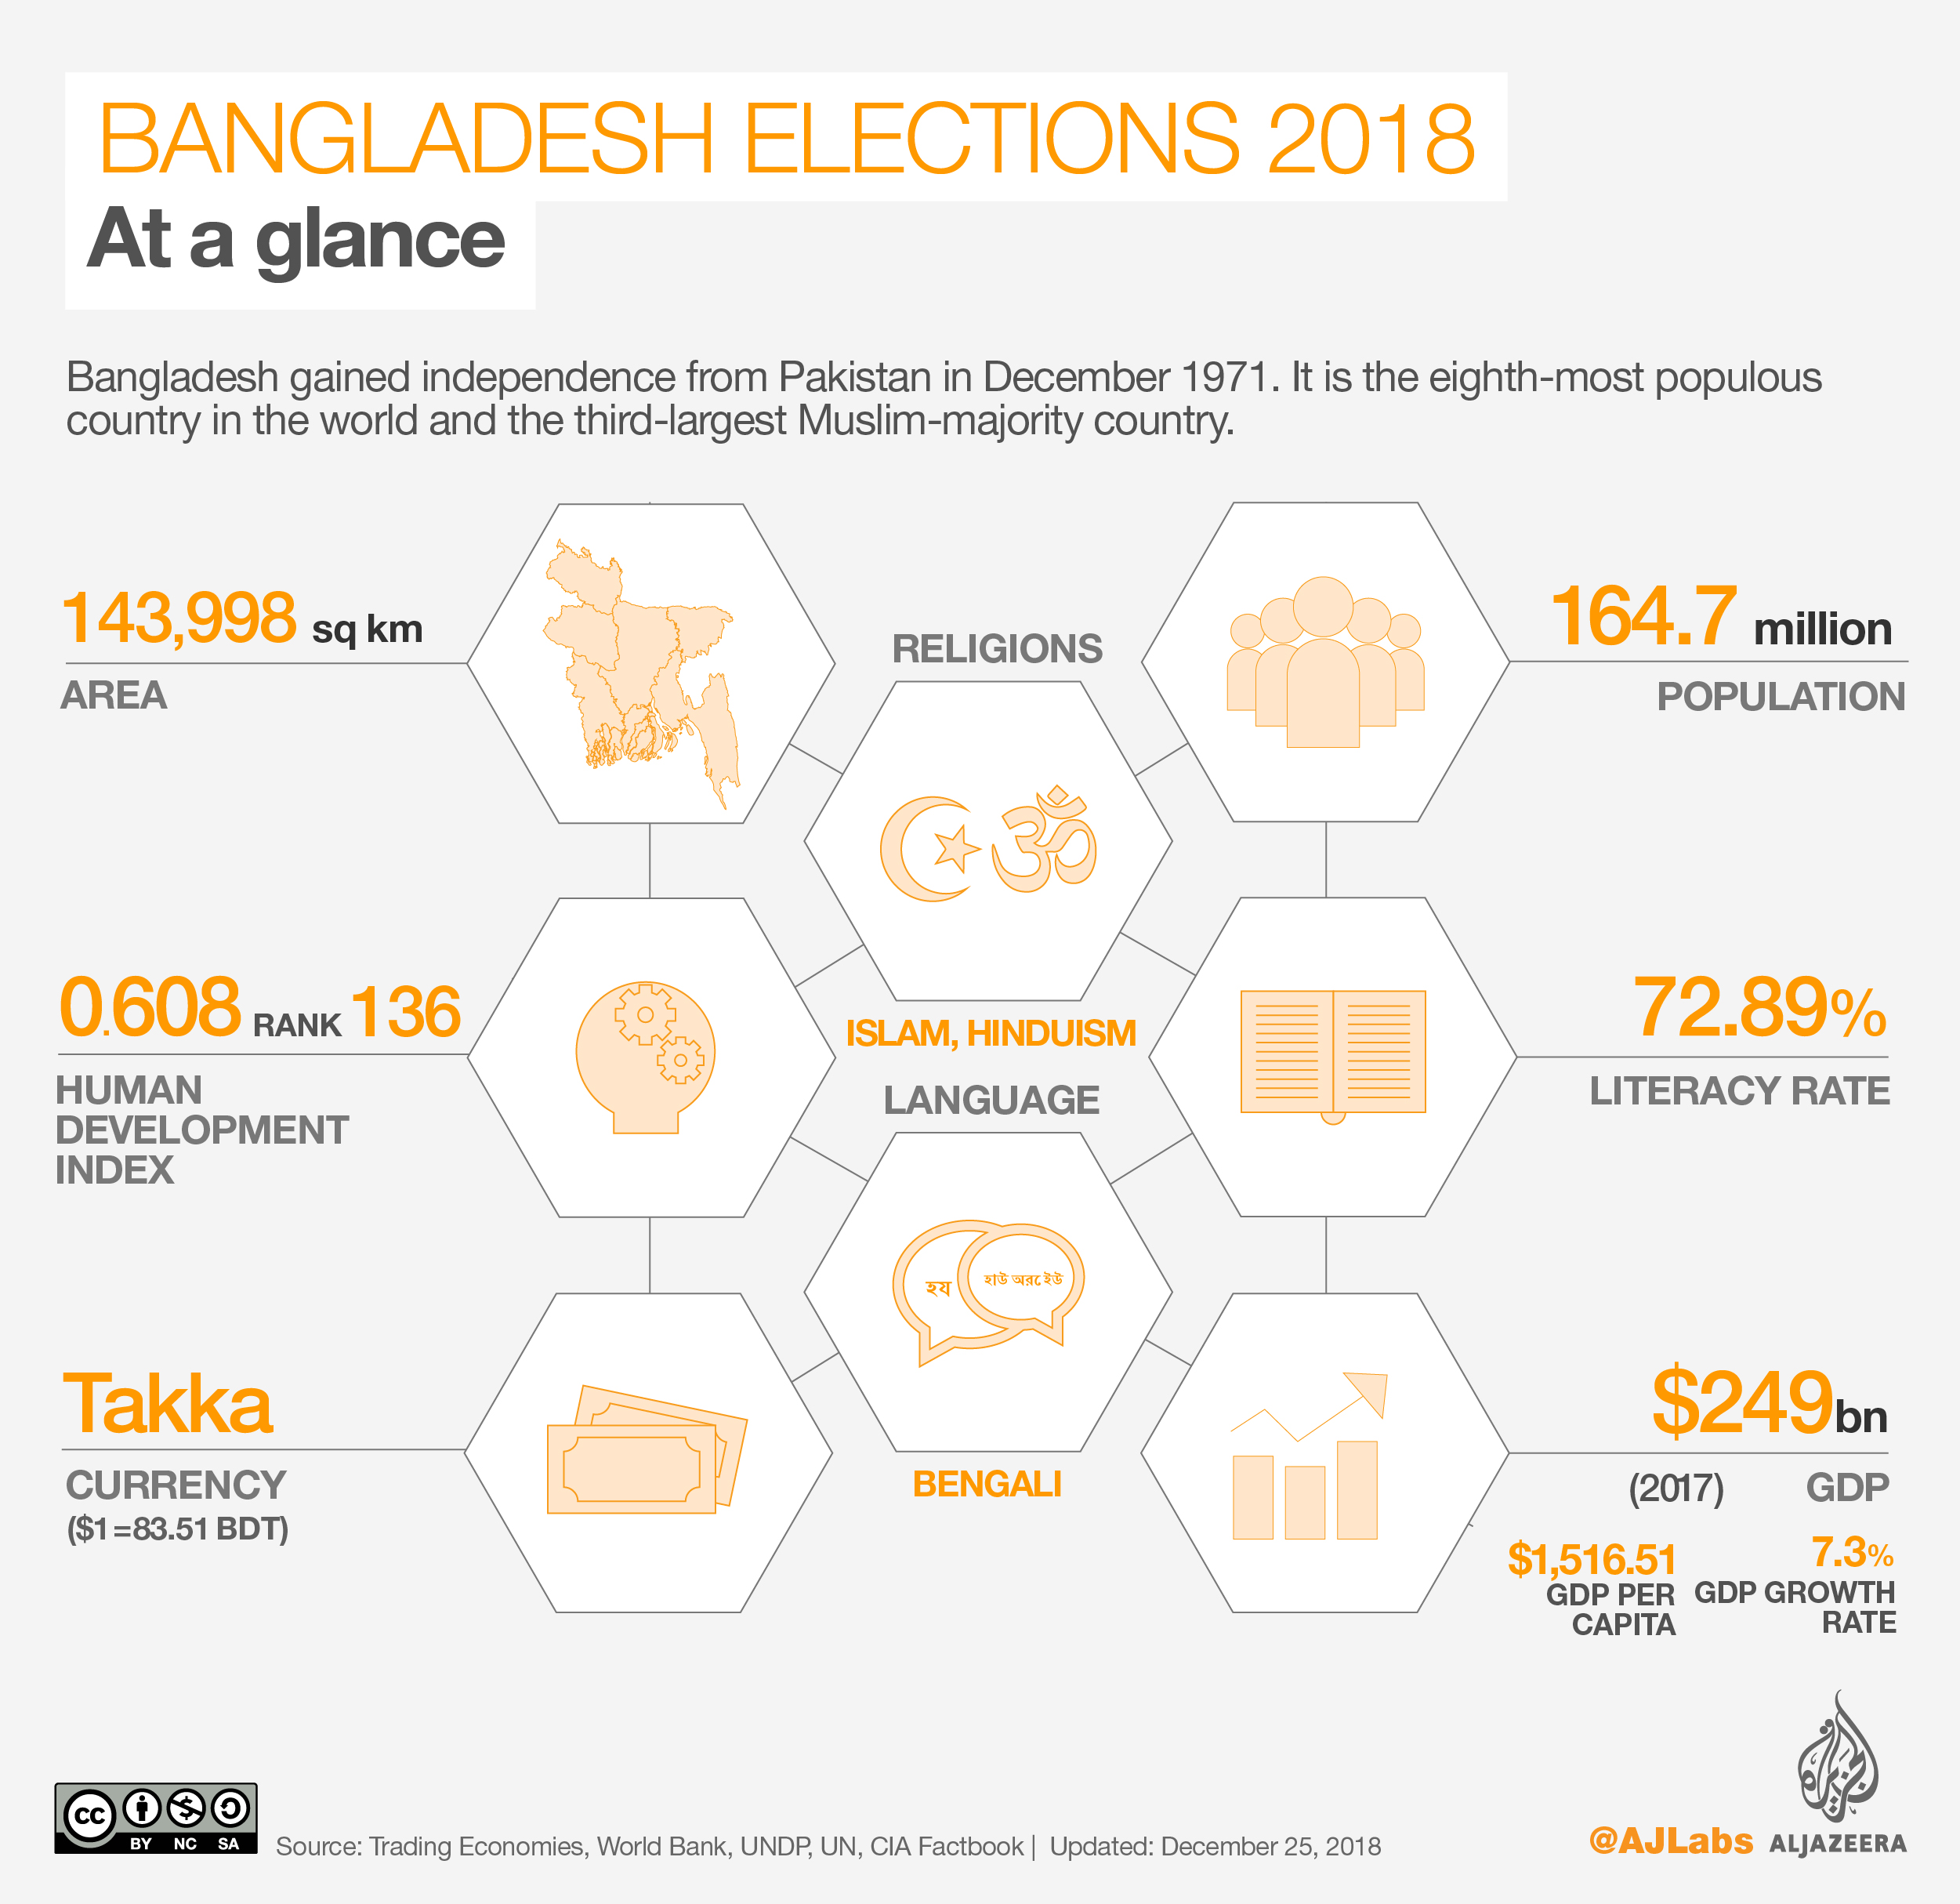 While Hasina banks on economic growth, the opposition accuses her of silencing dissent [Al Jazeera]